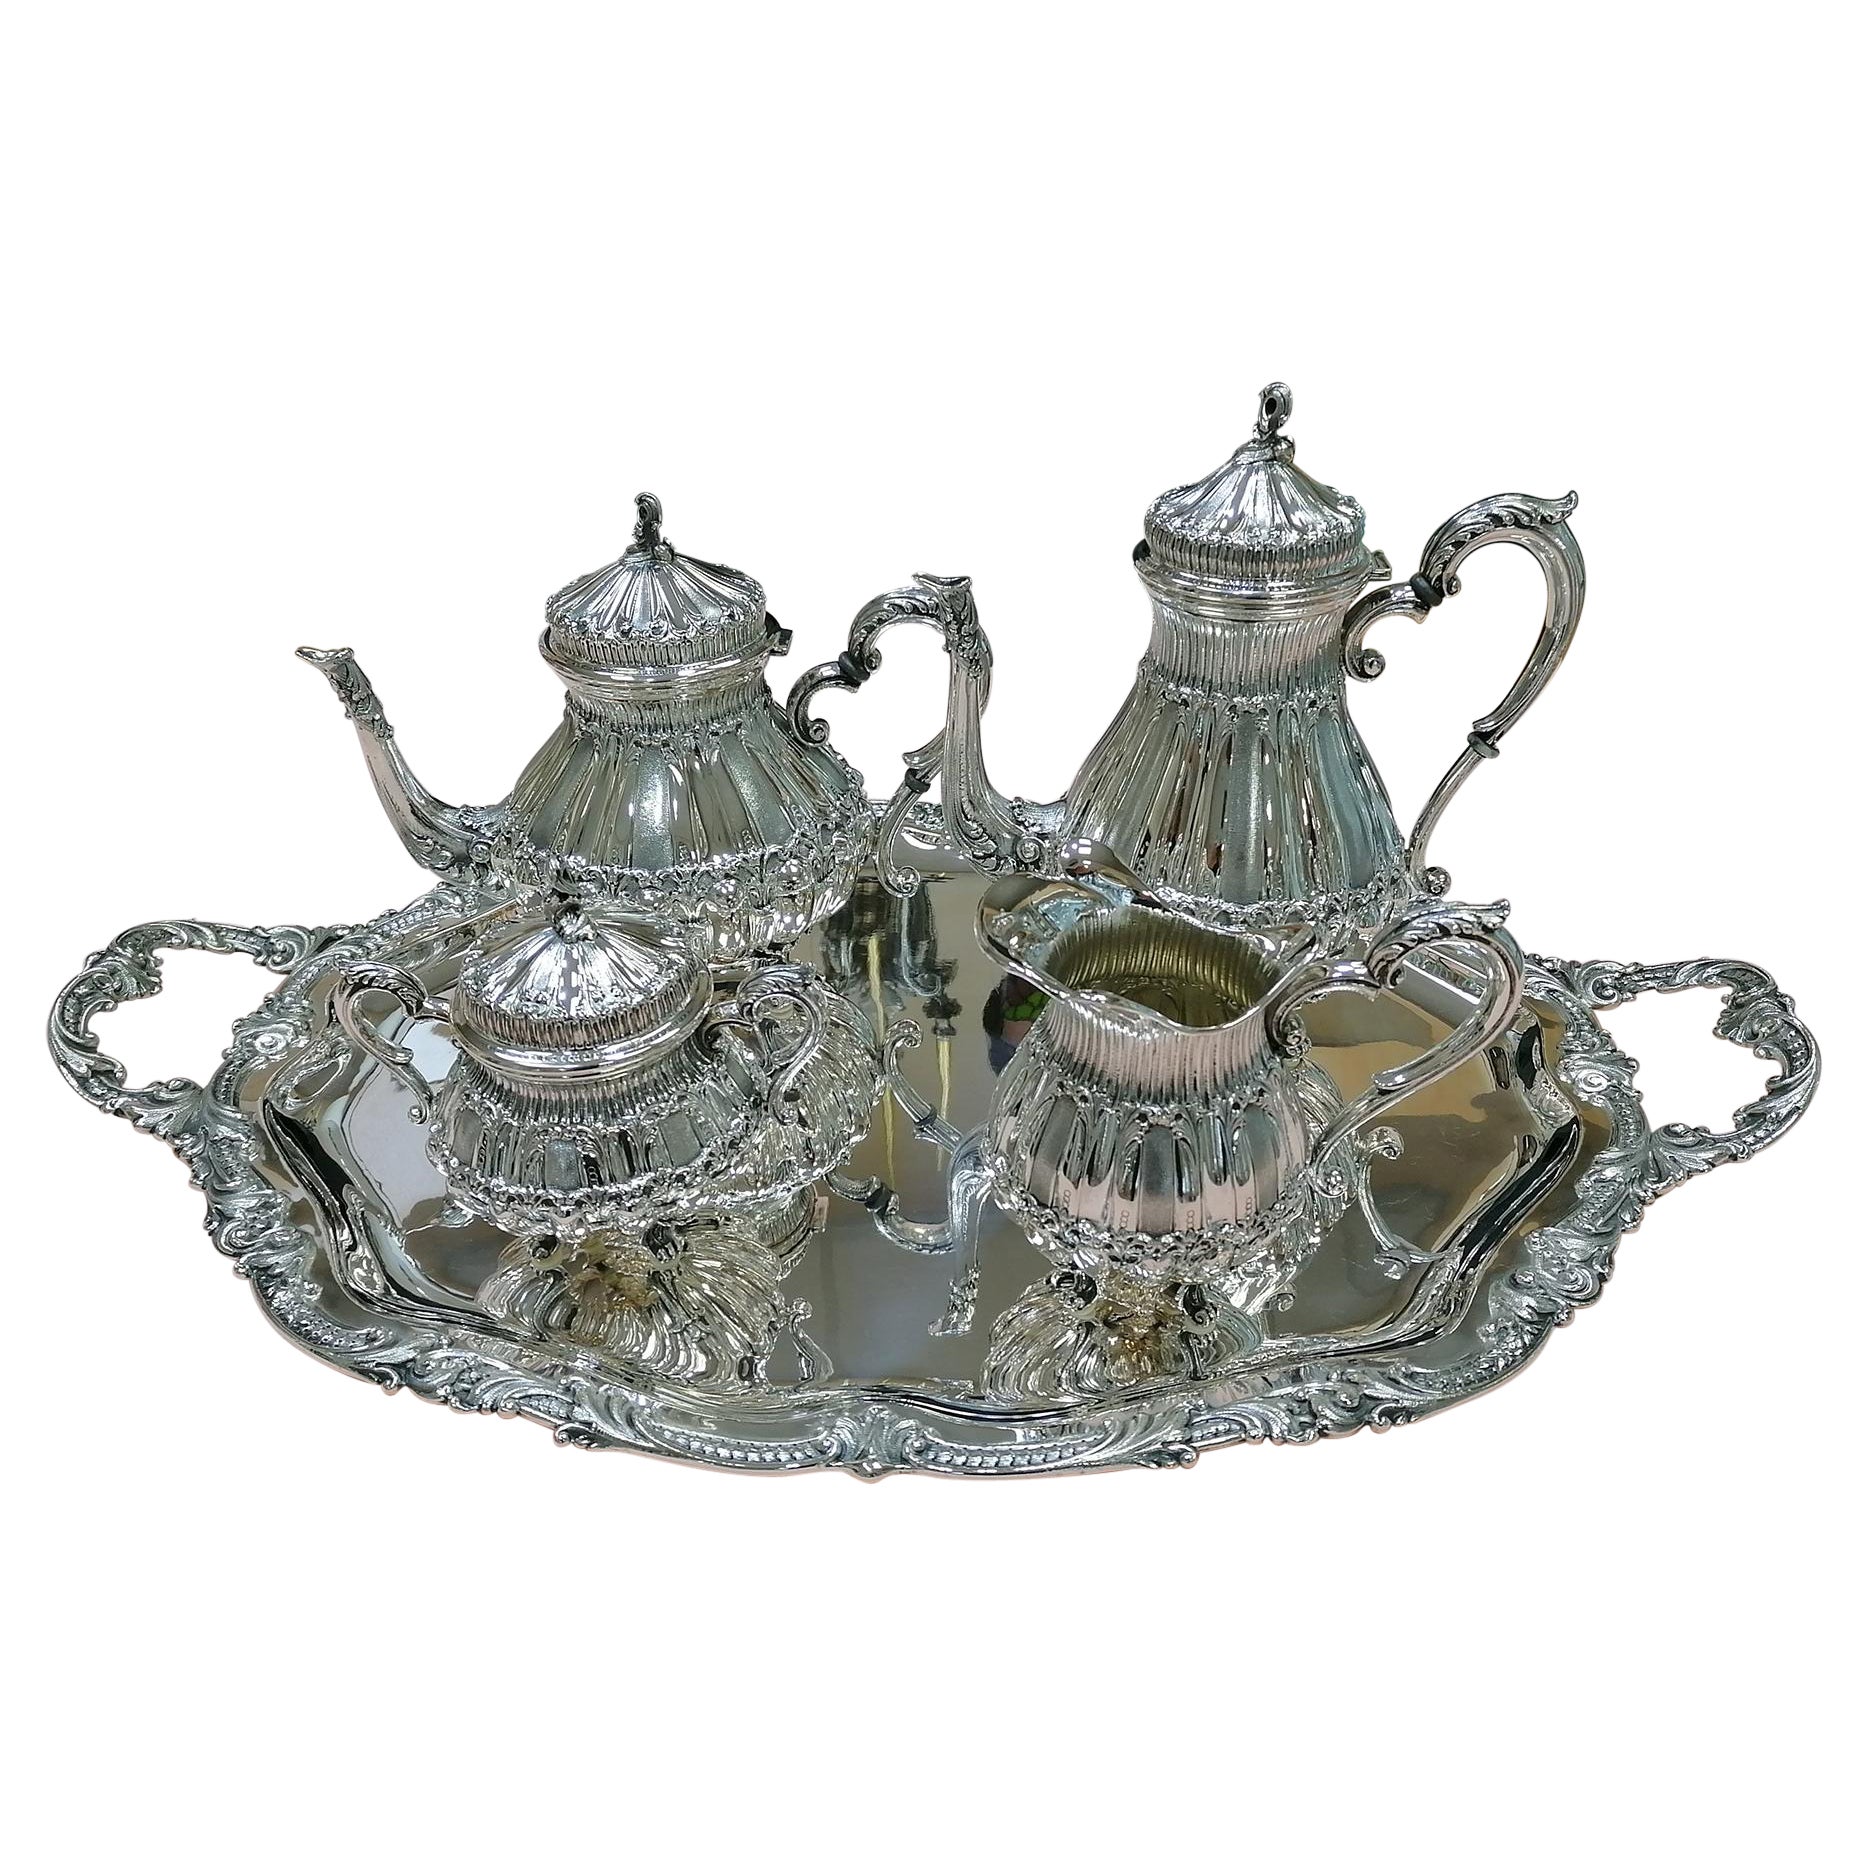 20th Century Italian Solid 800 Silver Tea-Coffeeset with Tray